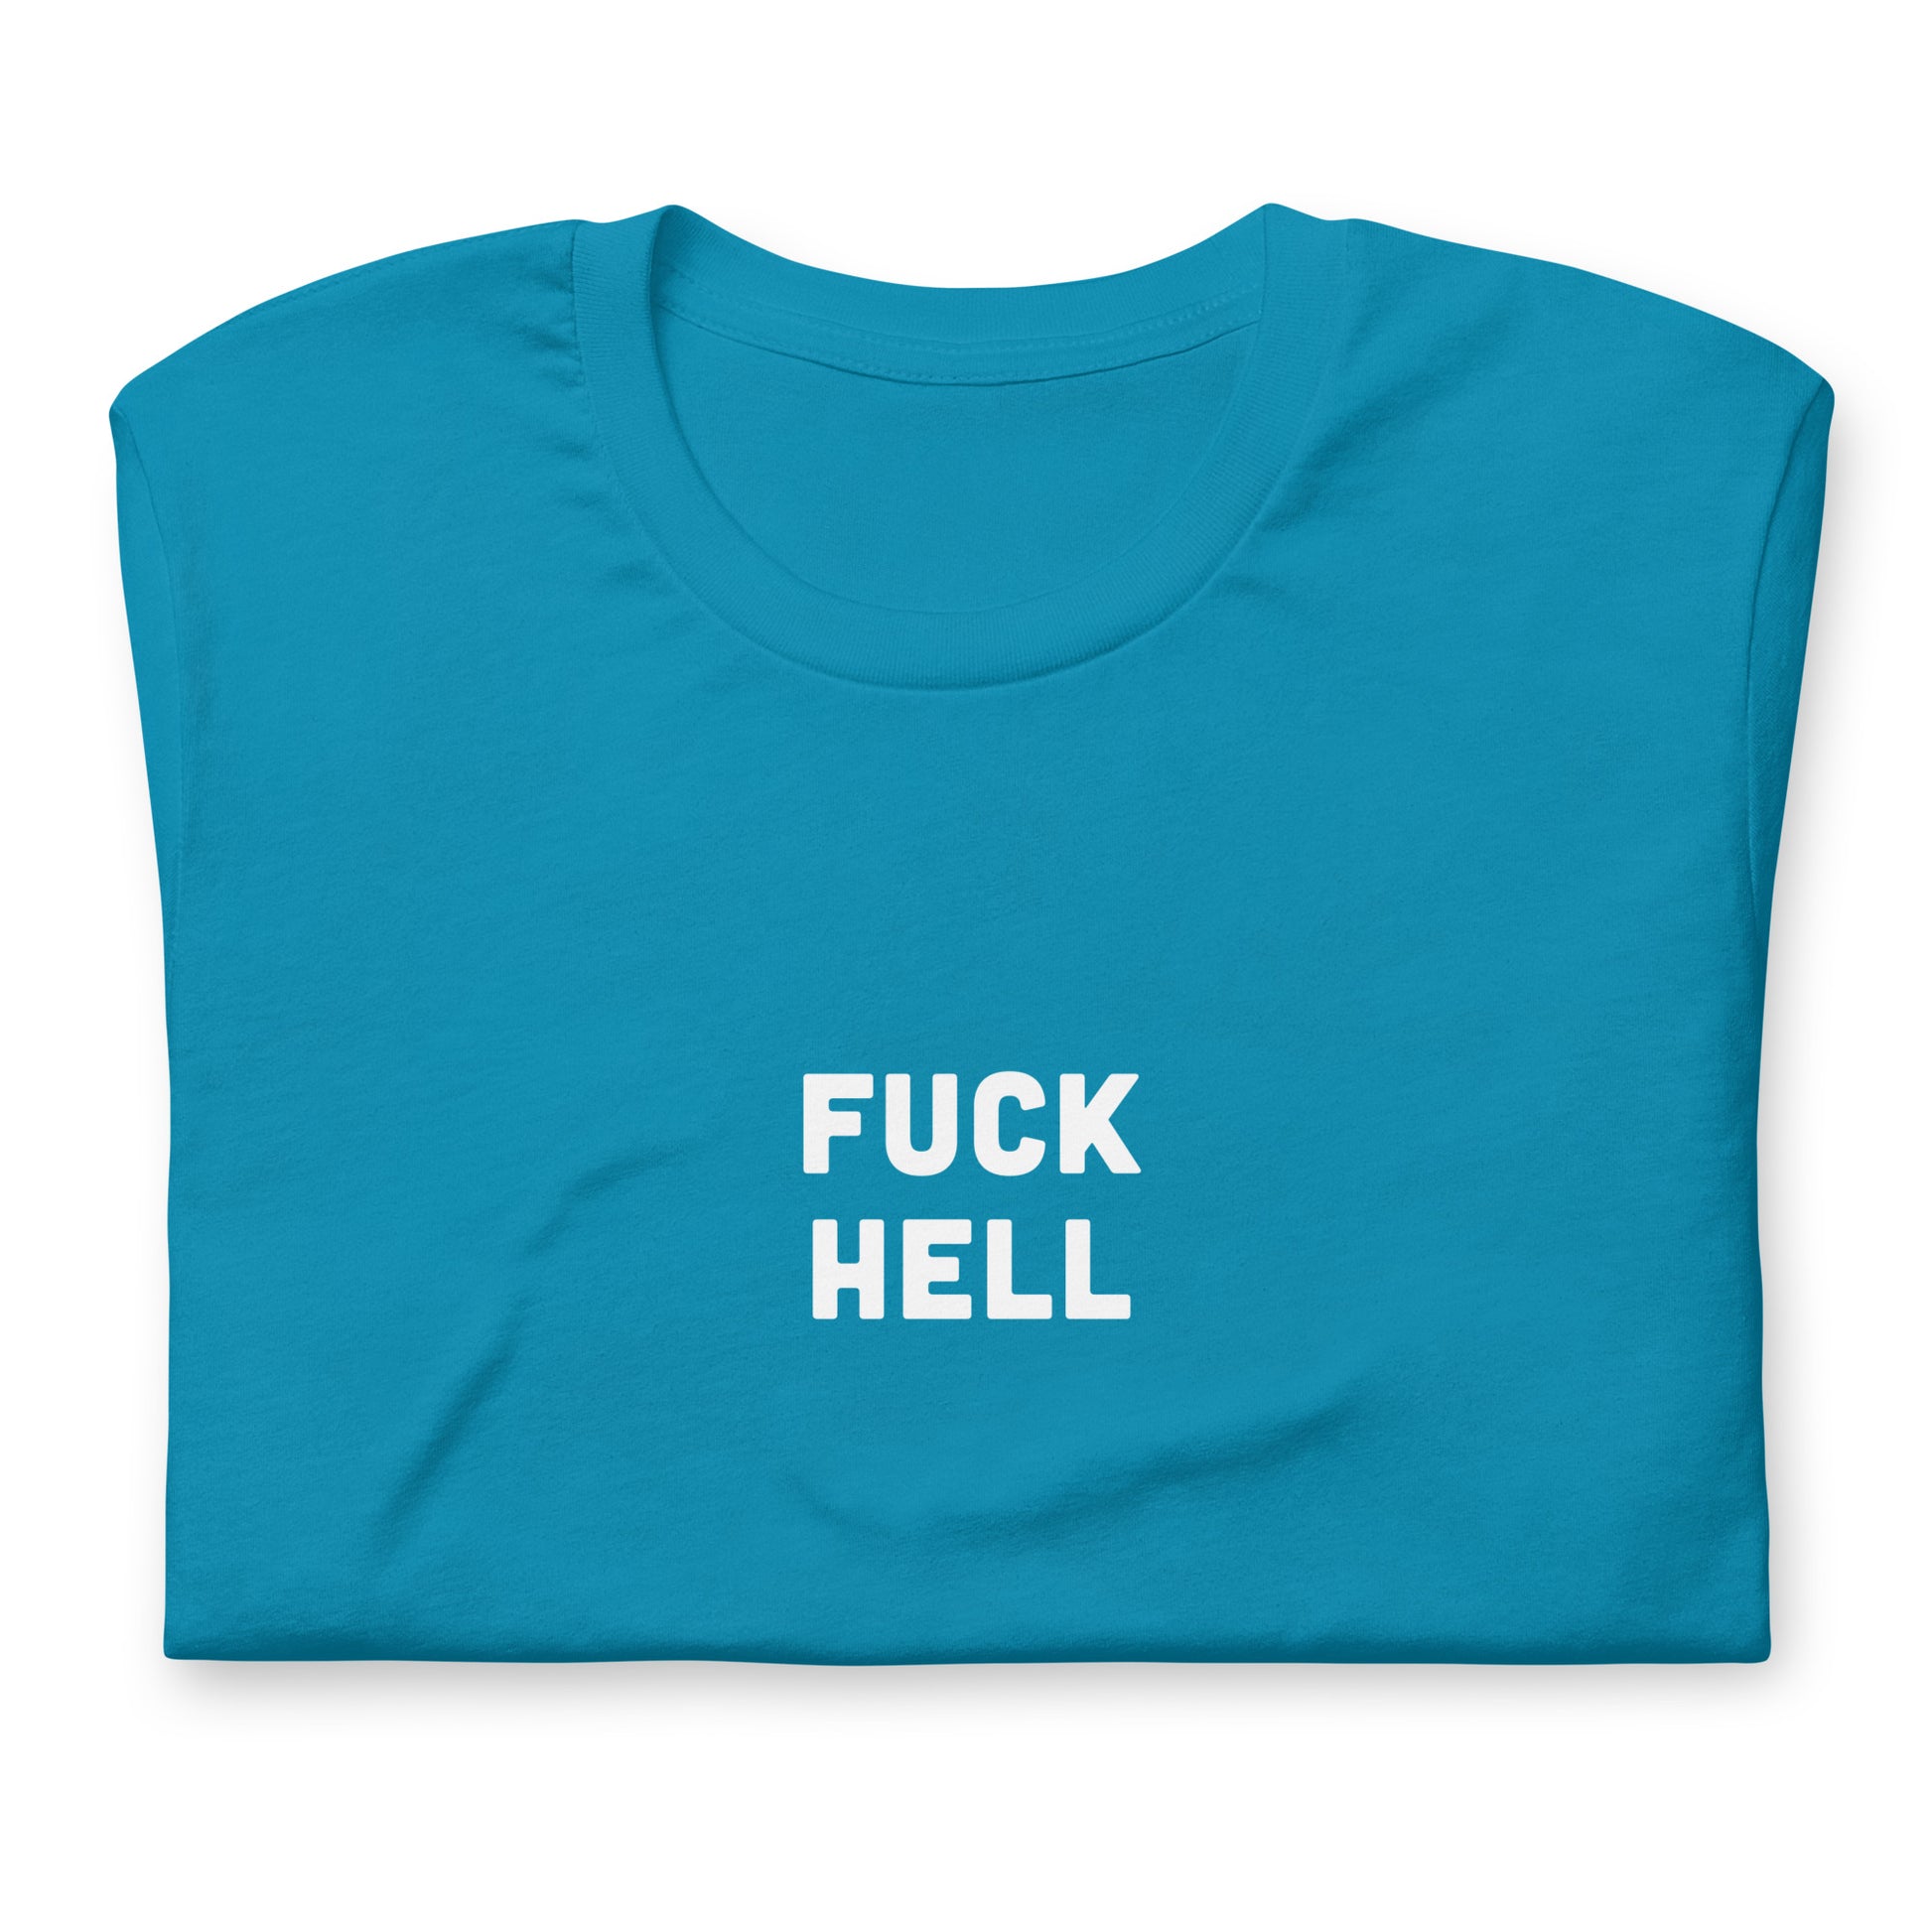 Fuck Hell T-Shirt Size M Color Navy